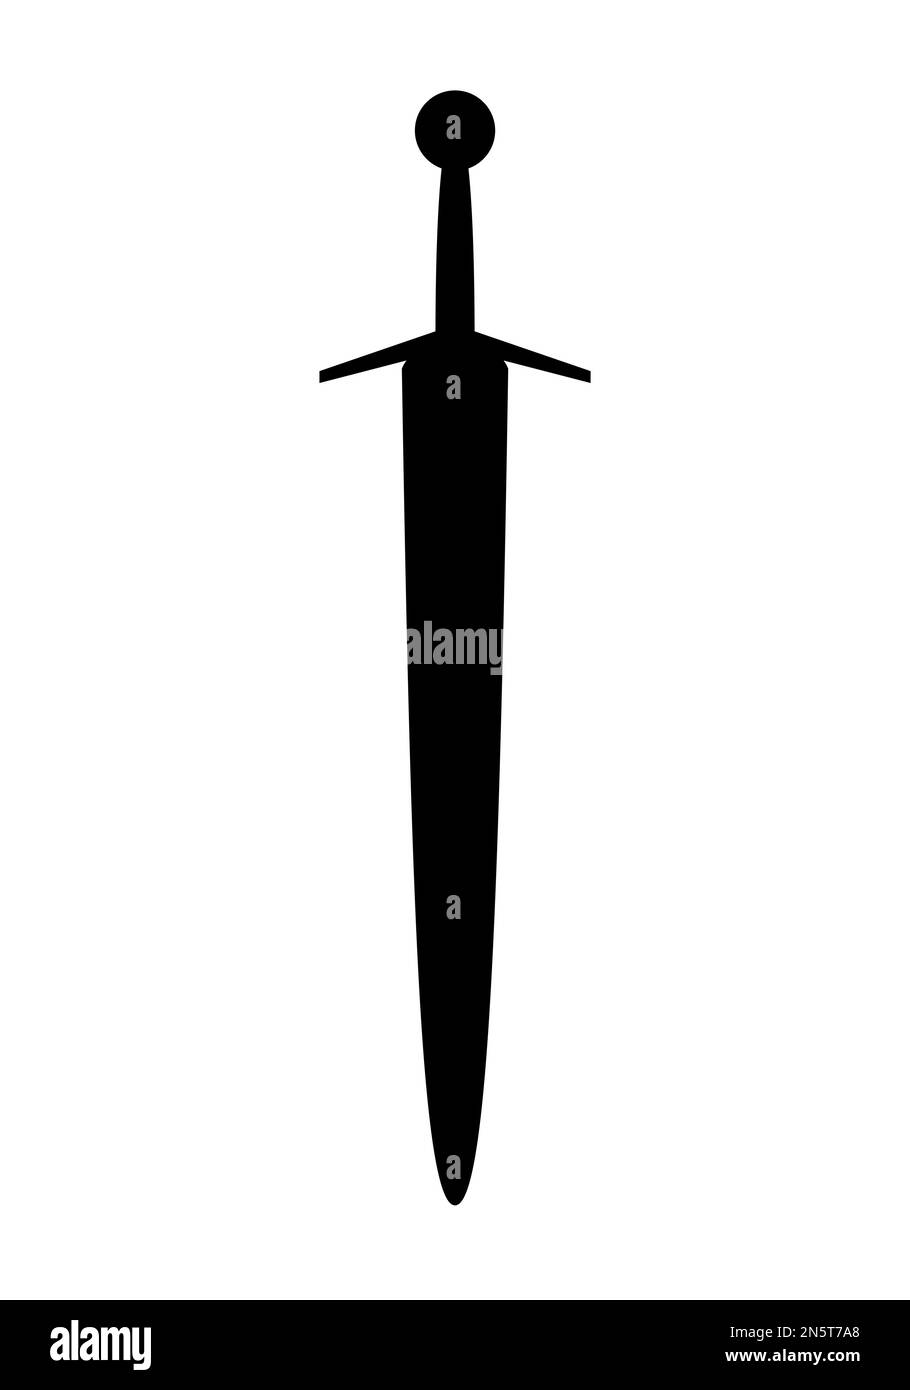 Sword silhouette - vector illustration of medieval sword on a white background Stock Vector